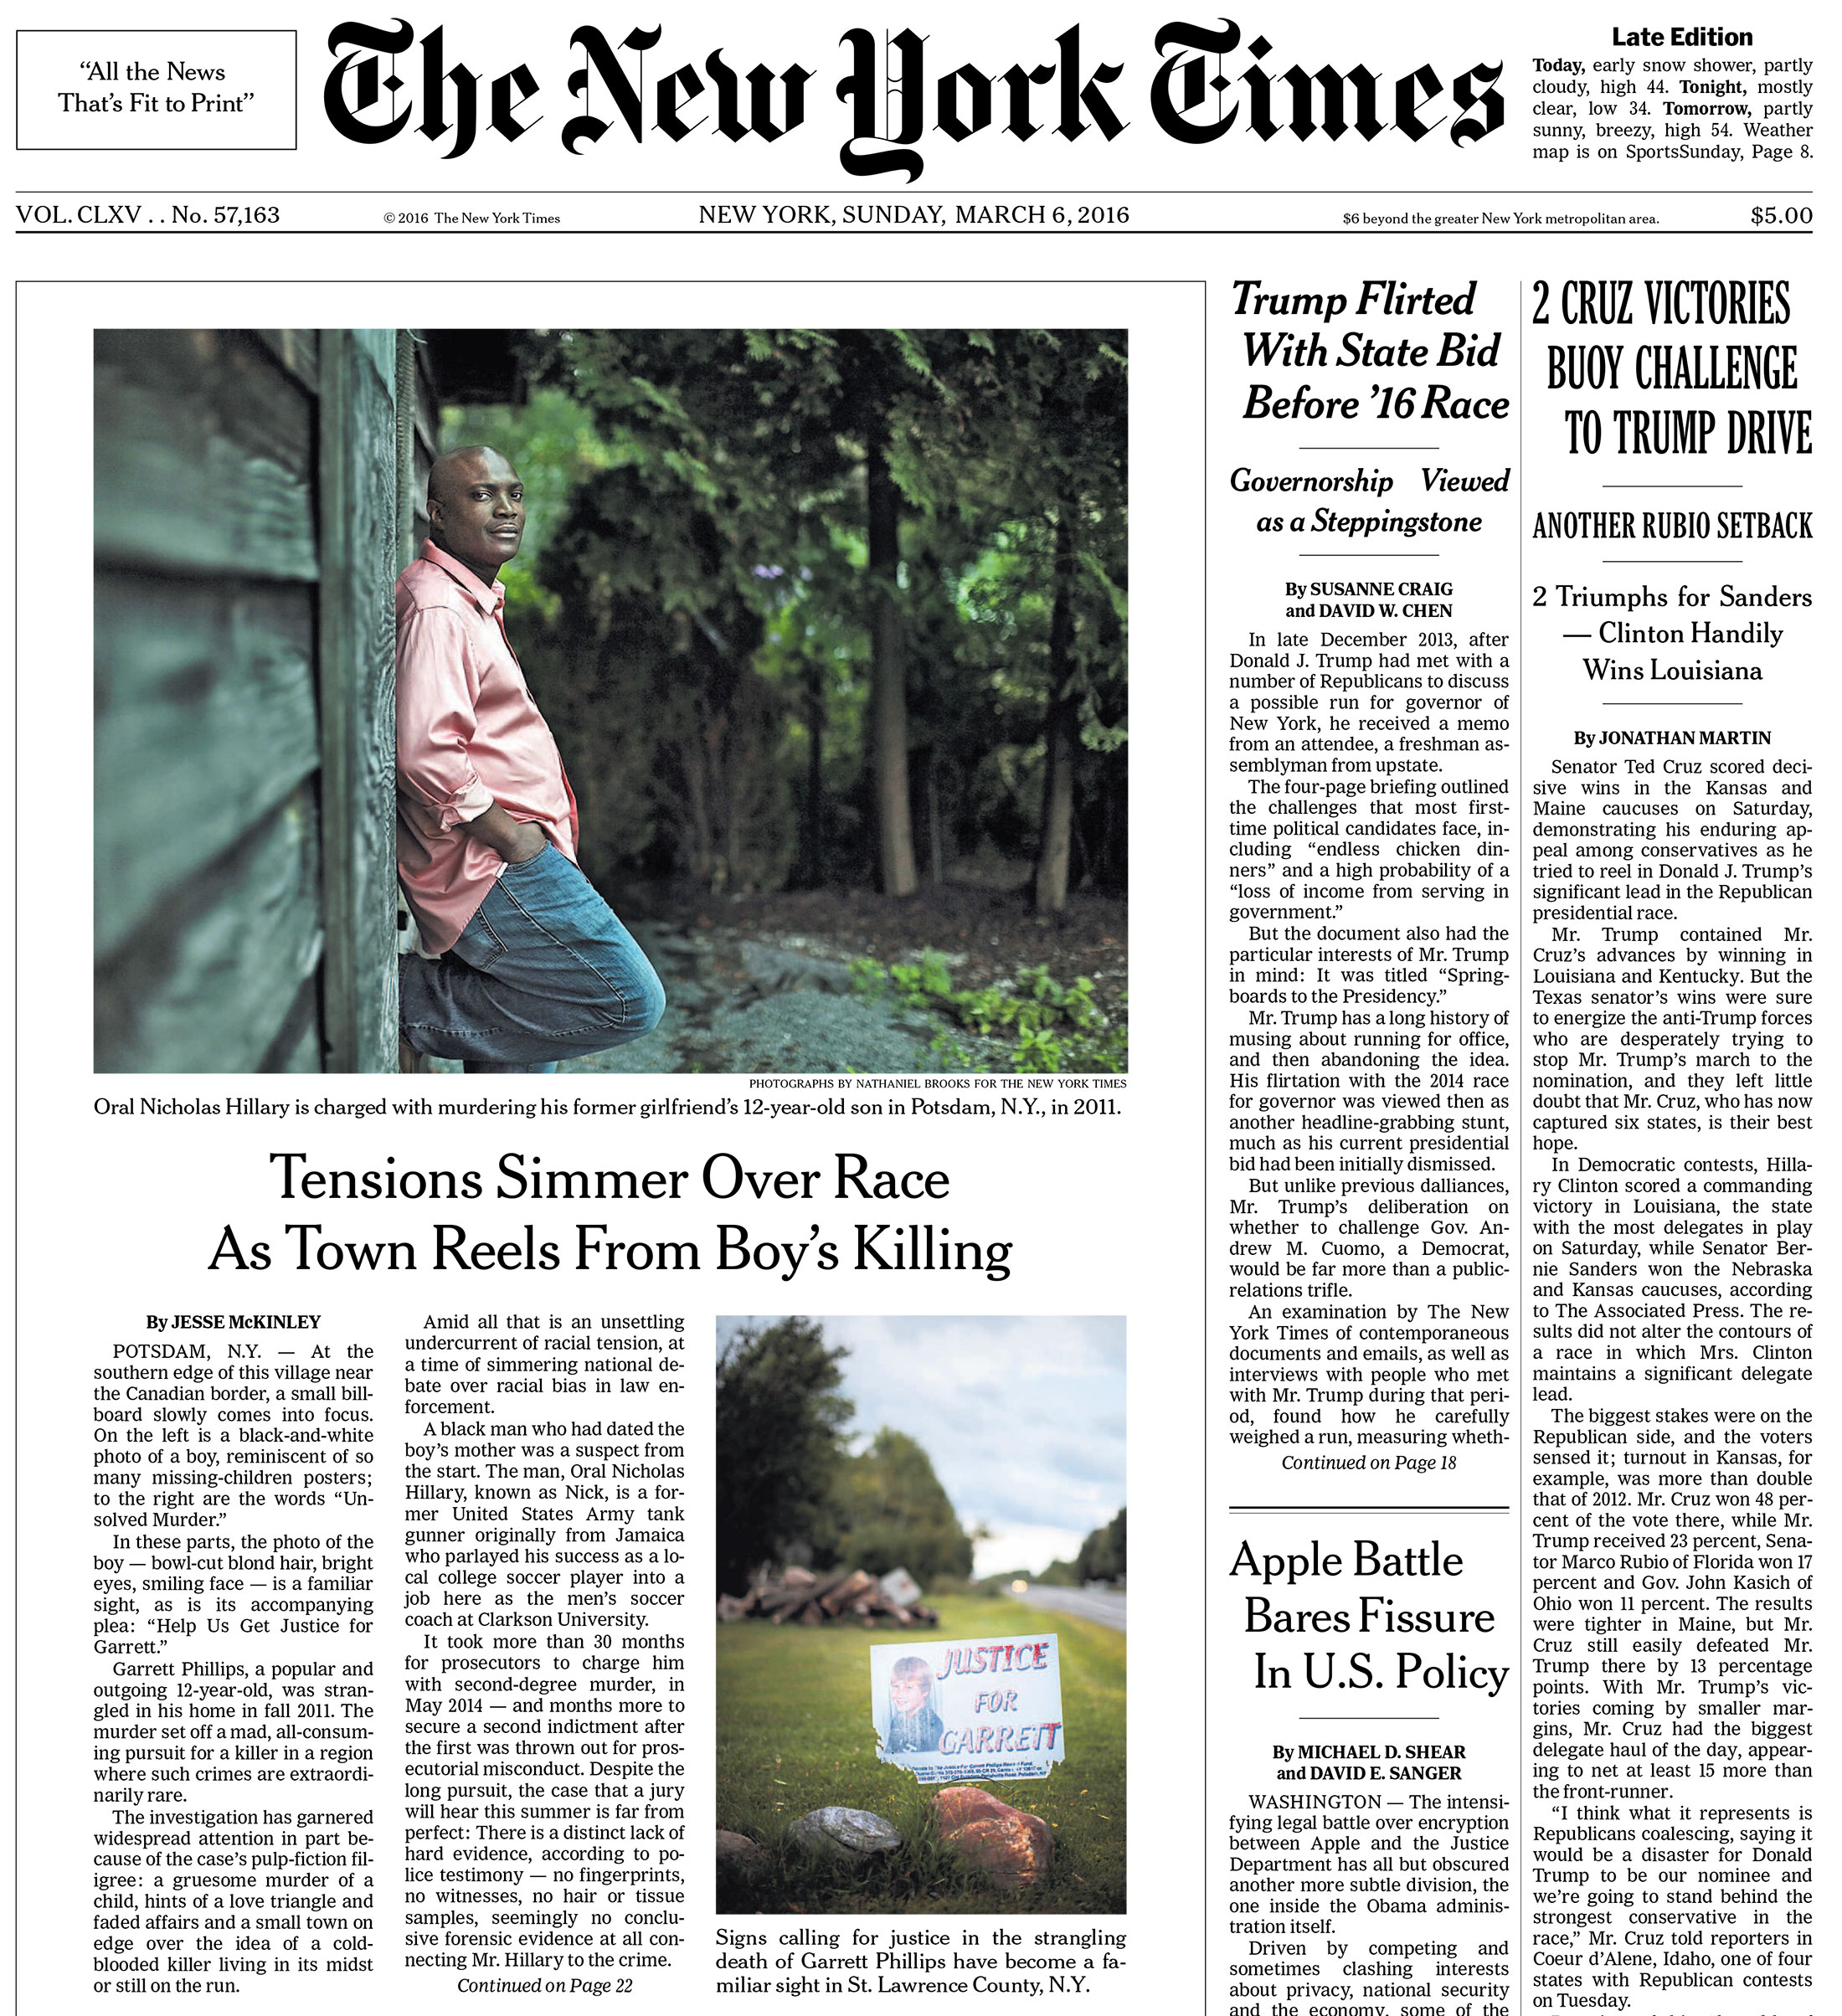 Cover of New York Times Sunday Paper